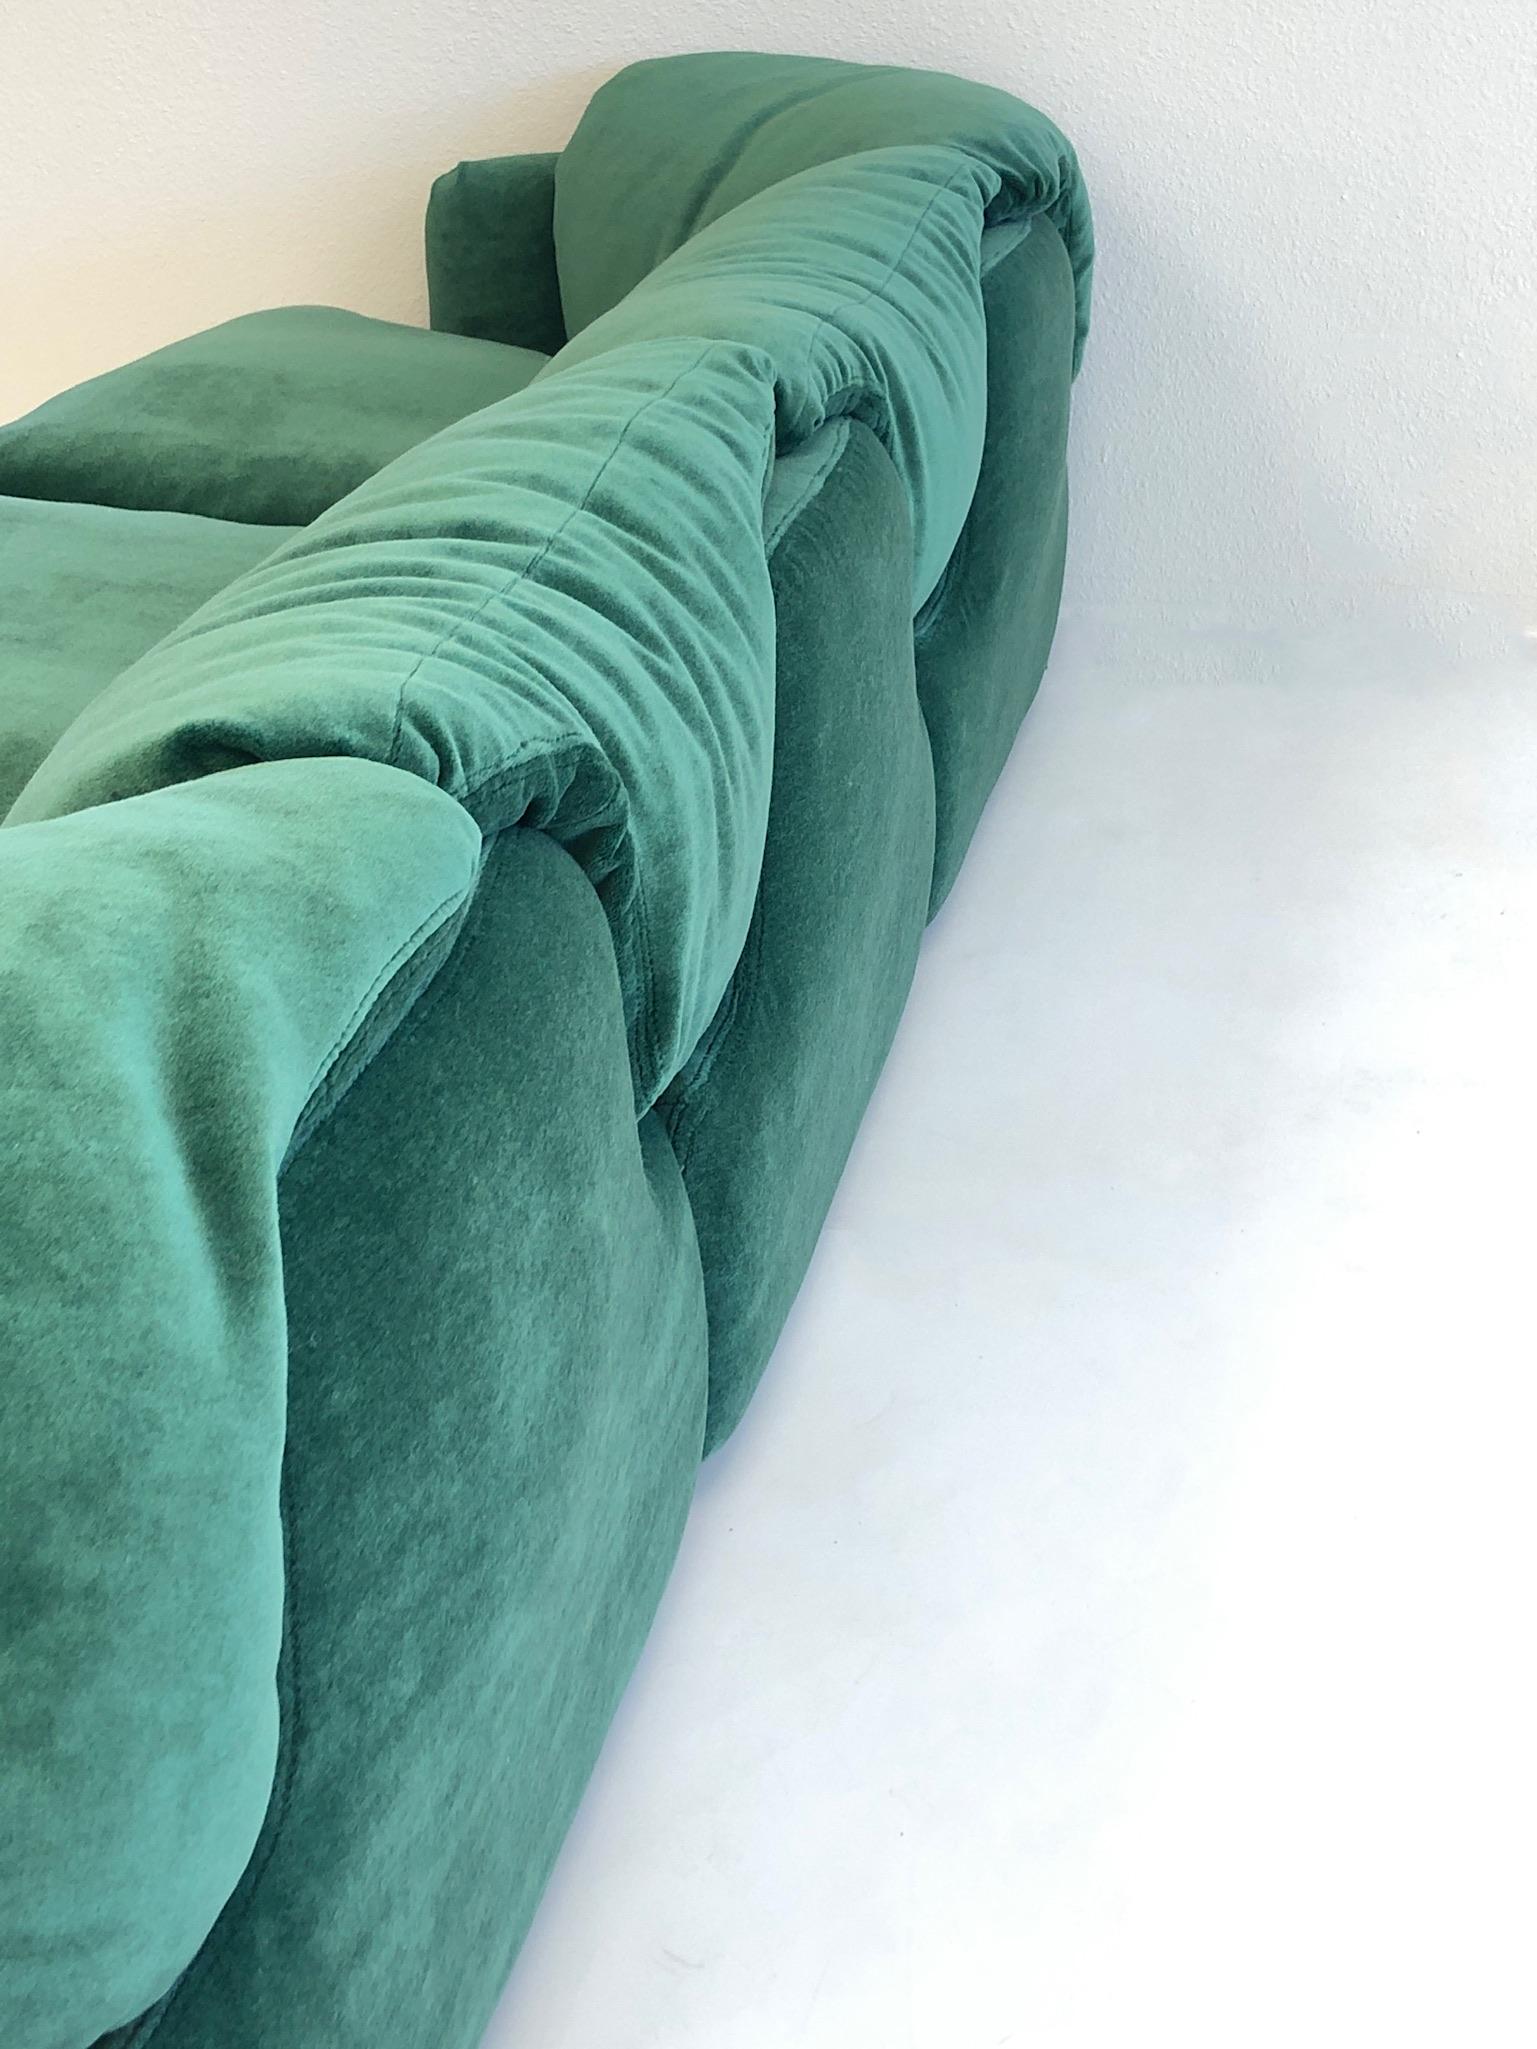 A spectacular pair of Italian “Confidential” sofas designed by Alberto Rosselli for Saporiti I the 1970s. The sofas have been newly recovered in a soft emerald green mohair fabric. The base on the sofas is black plastic. Both sofas retain Saporiti